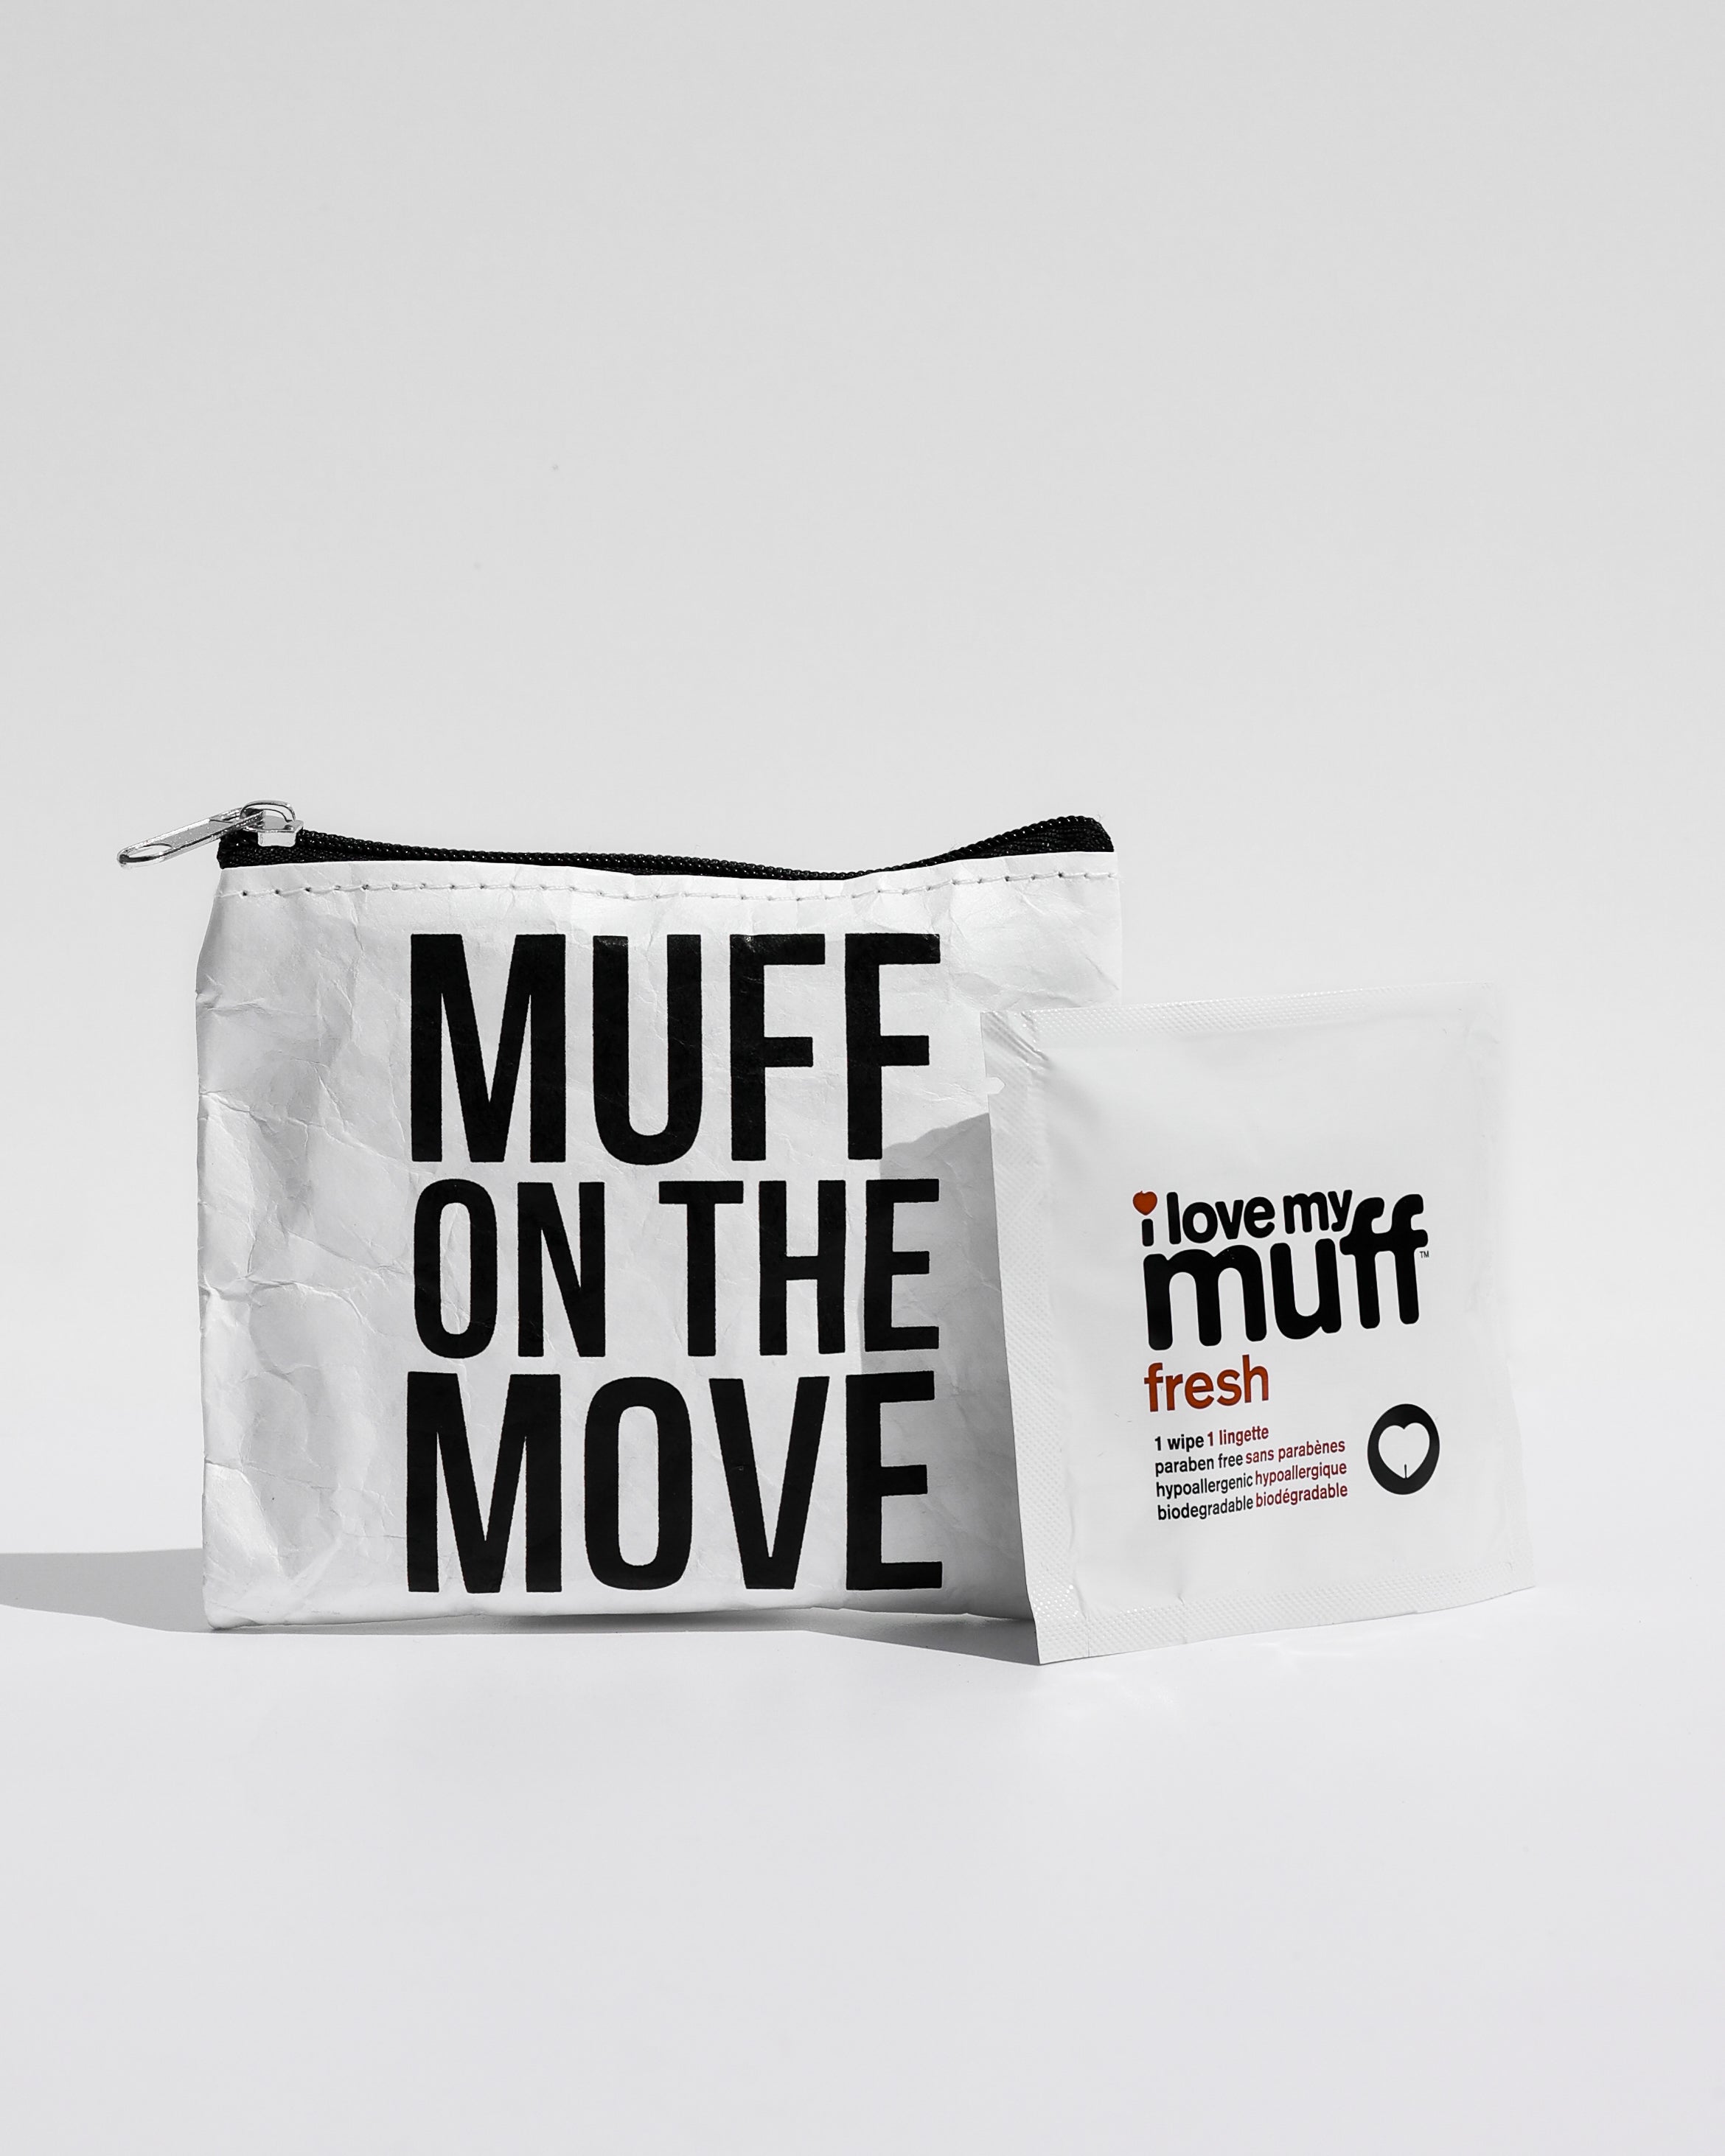 aung thein oo recommends we love muff com pic